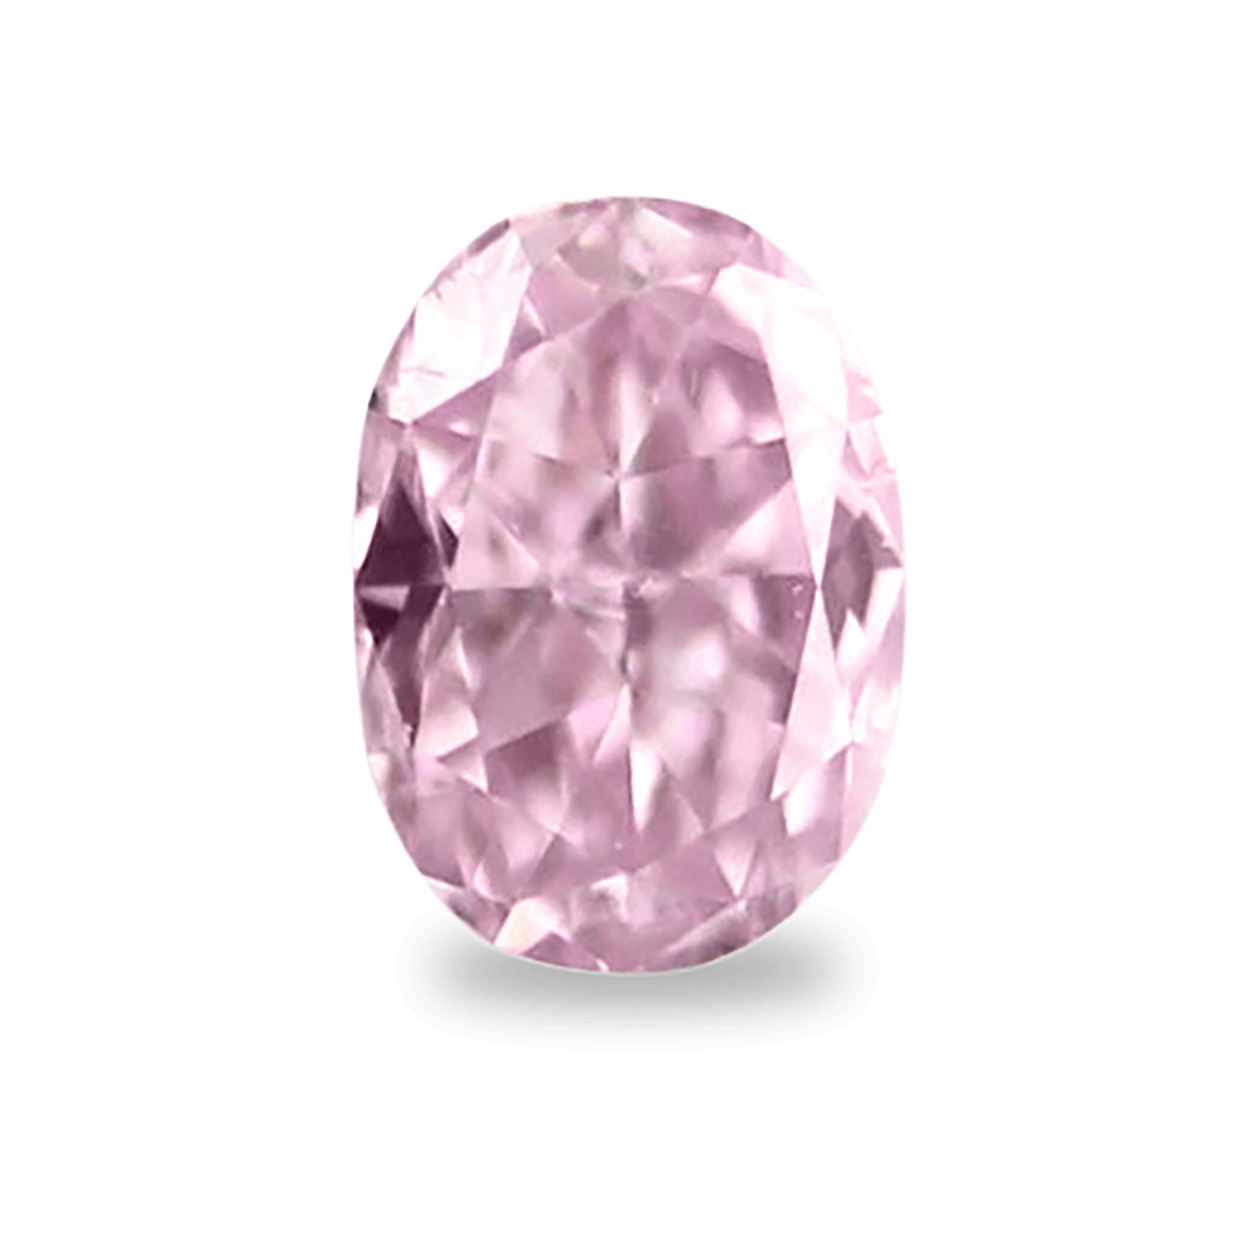 GIA Certified Natural Fancy Pink Oval Diamond 1.11ct - Ideal Luxury